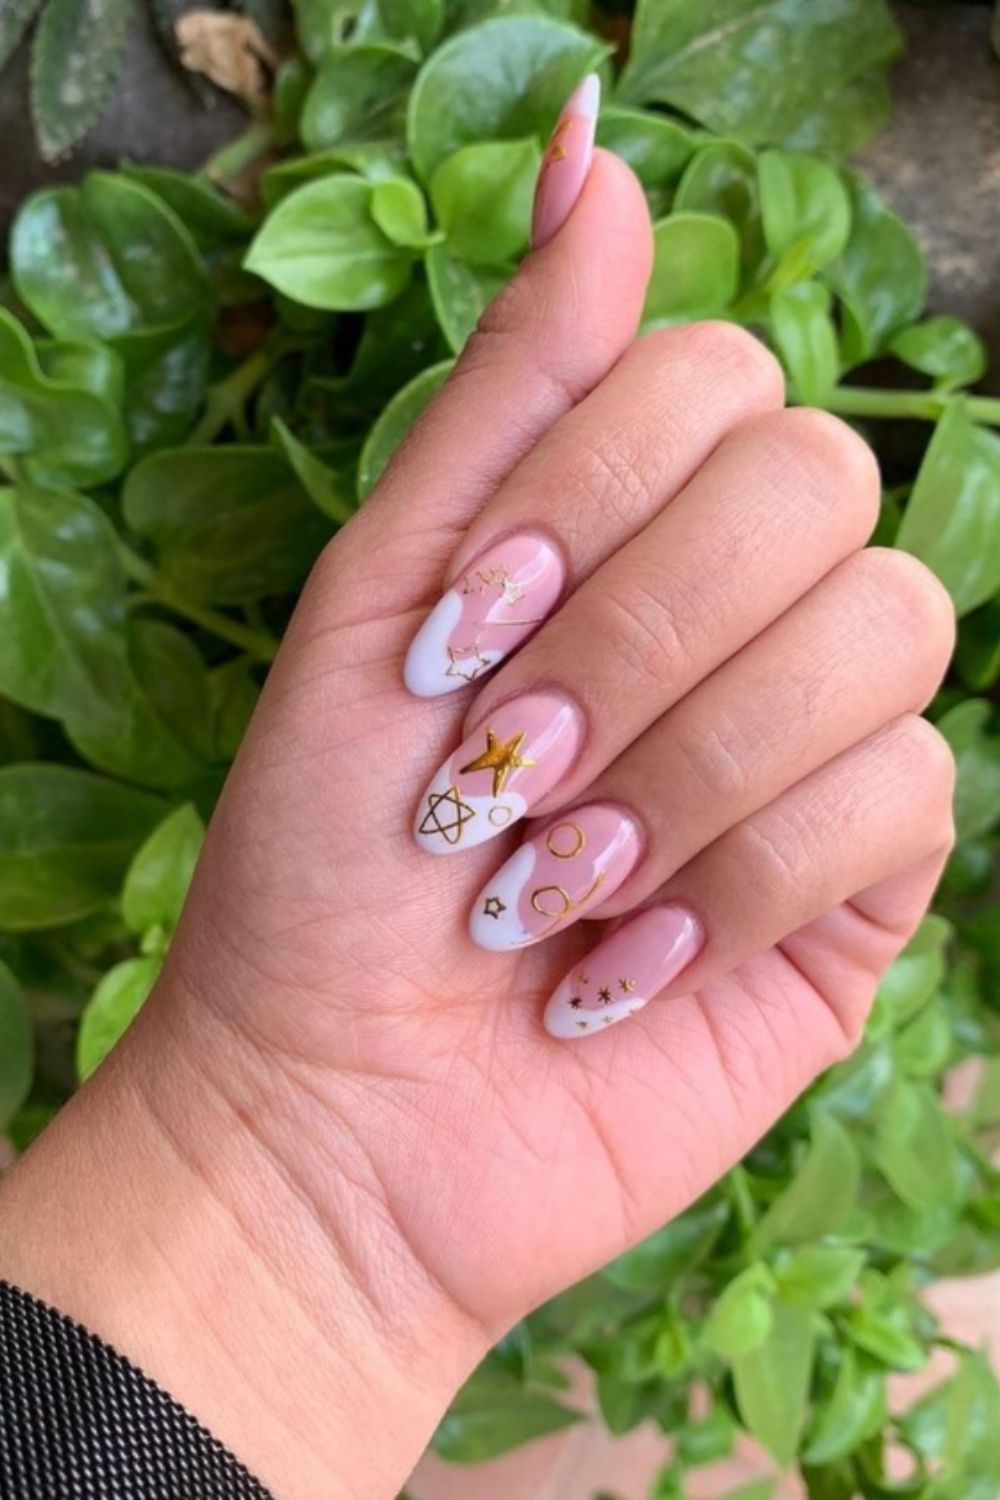 French white tip nails